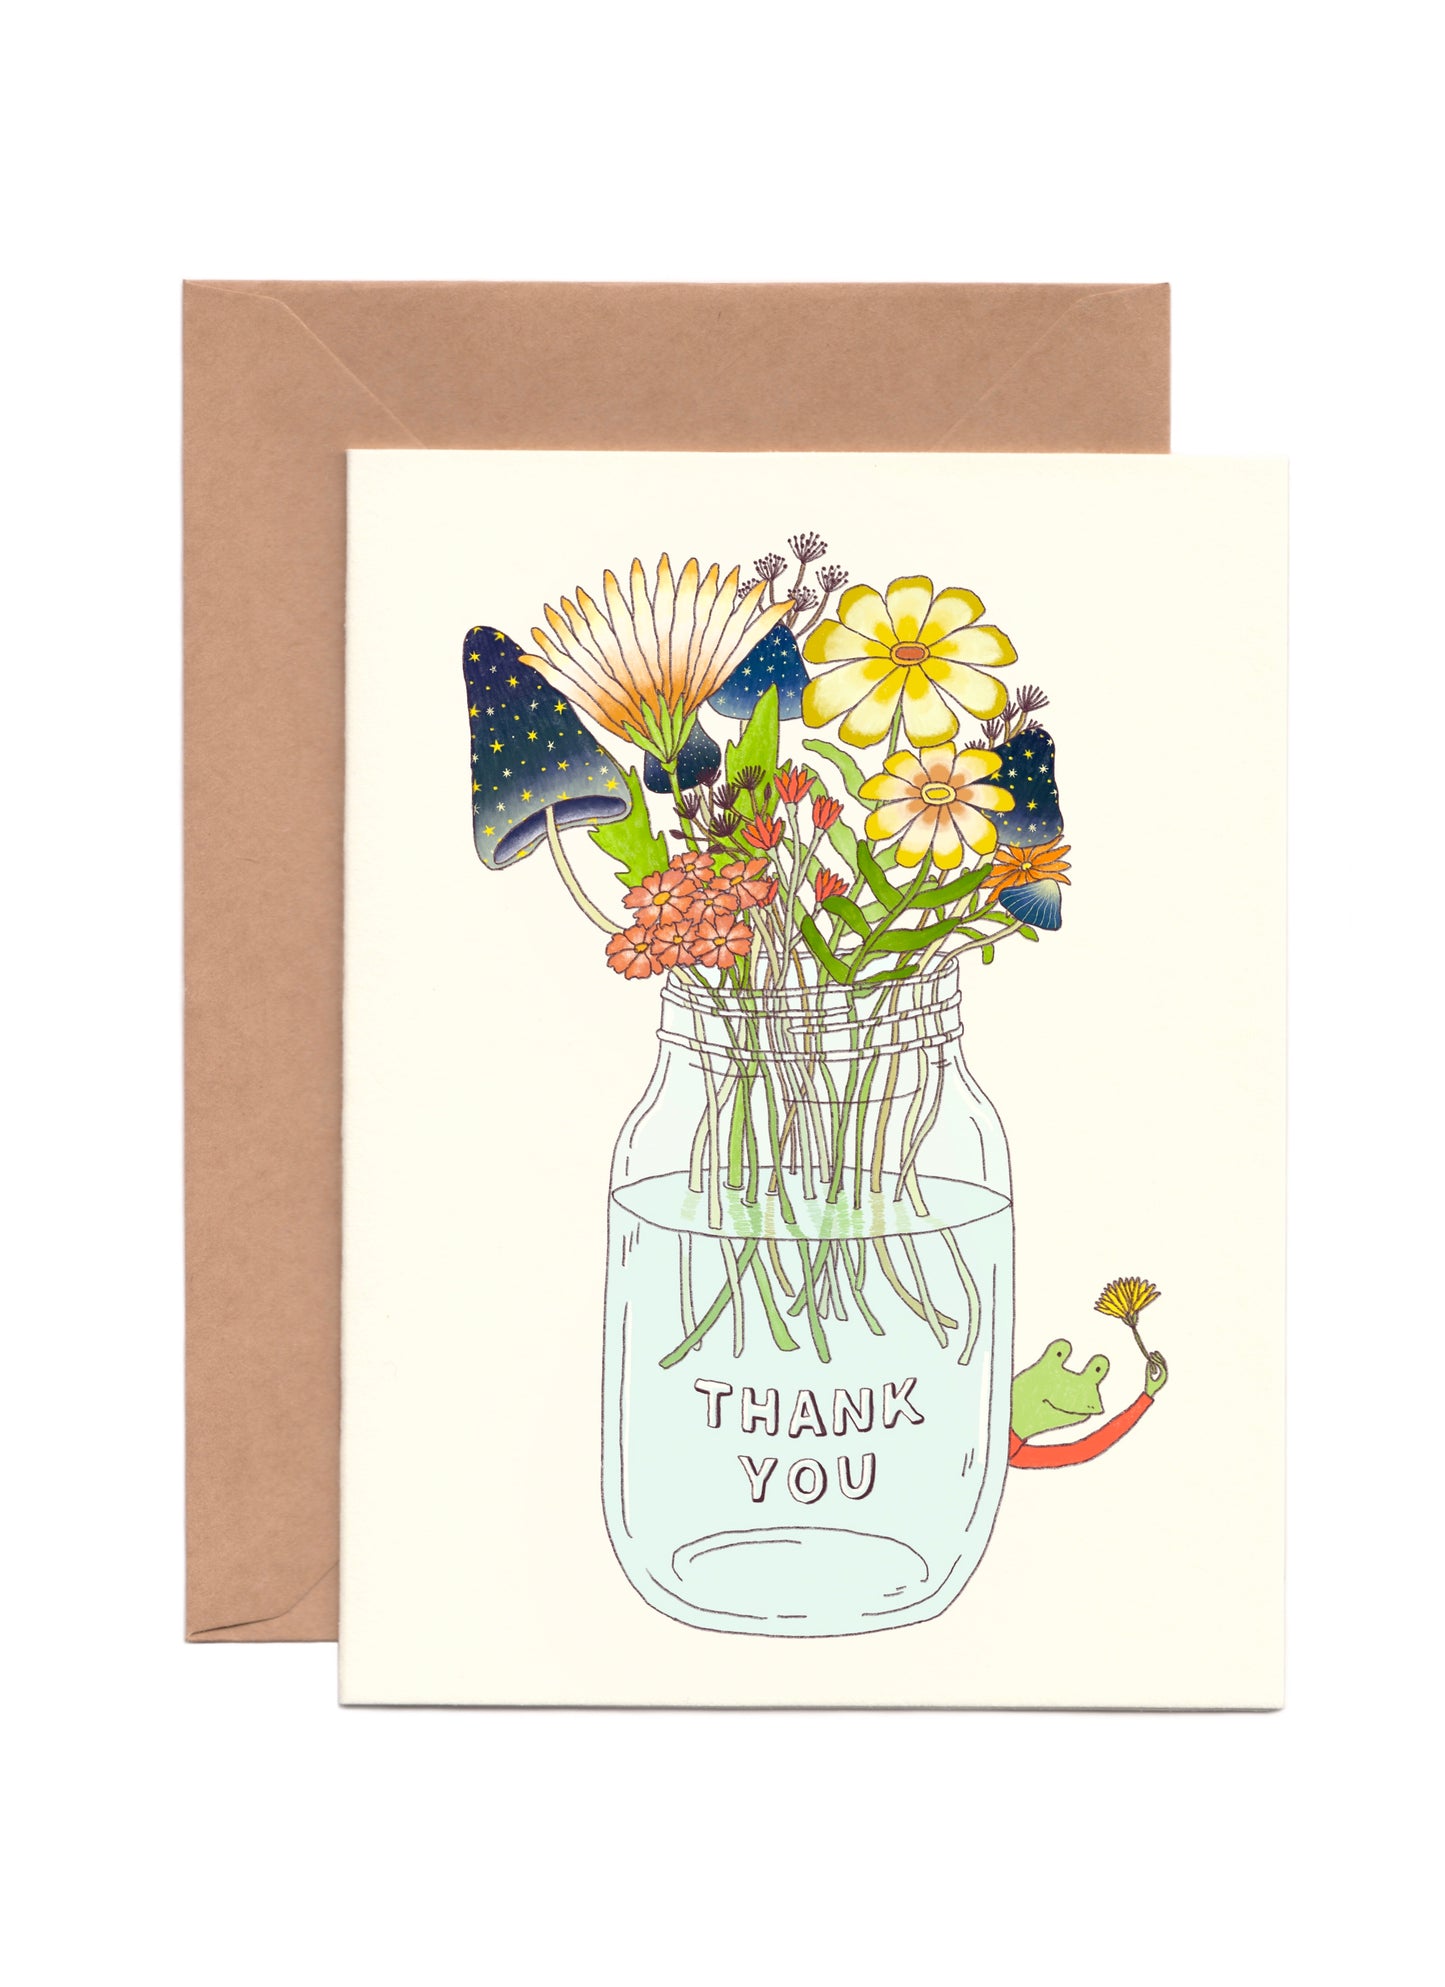 Thank you Card with illustration of flowers and starry mushrooms in a mason jar that says “Thank You” 